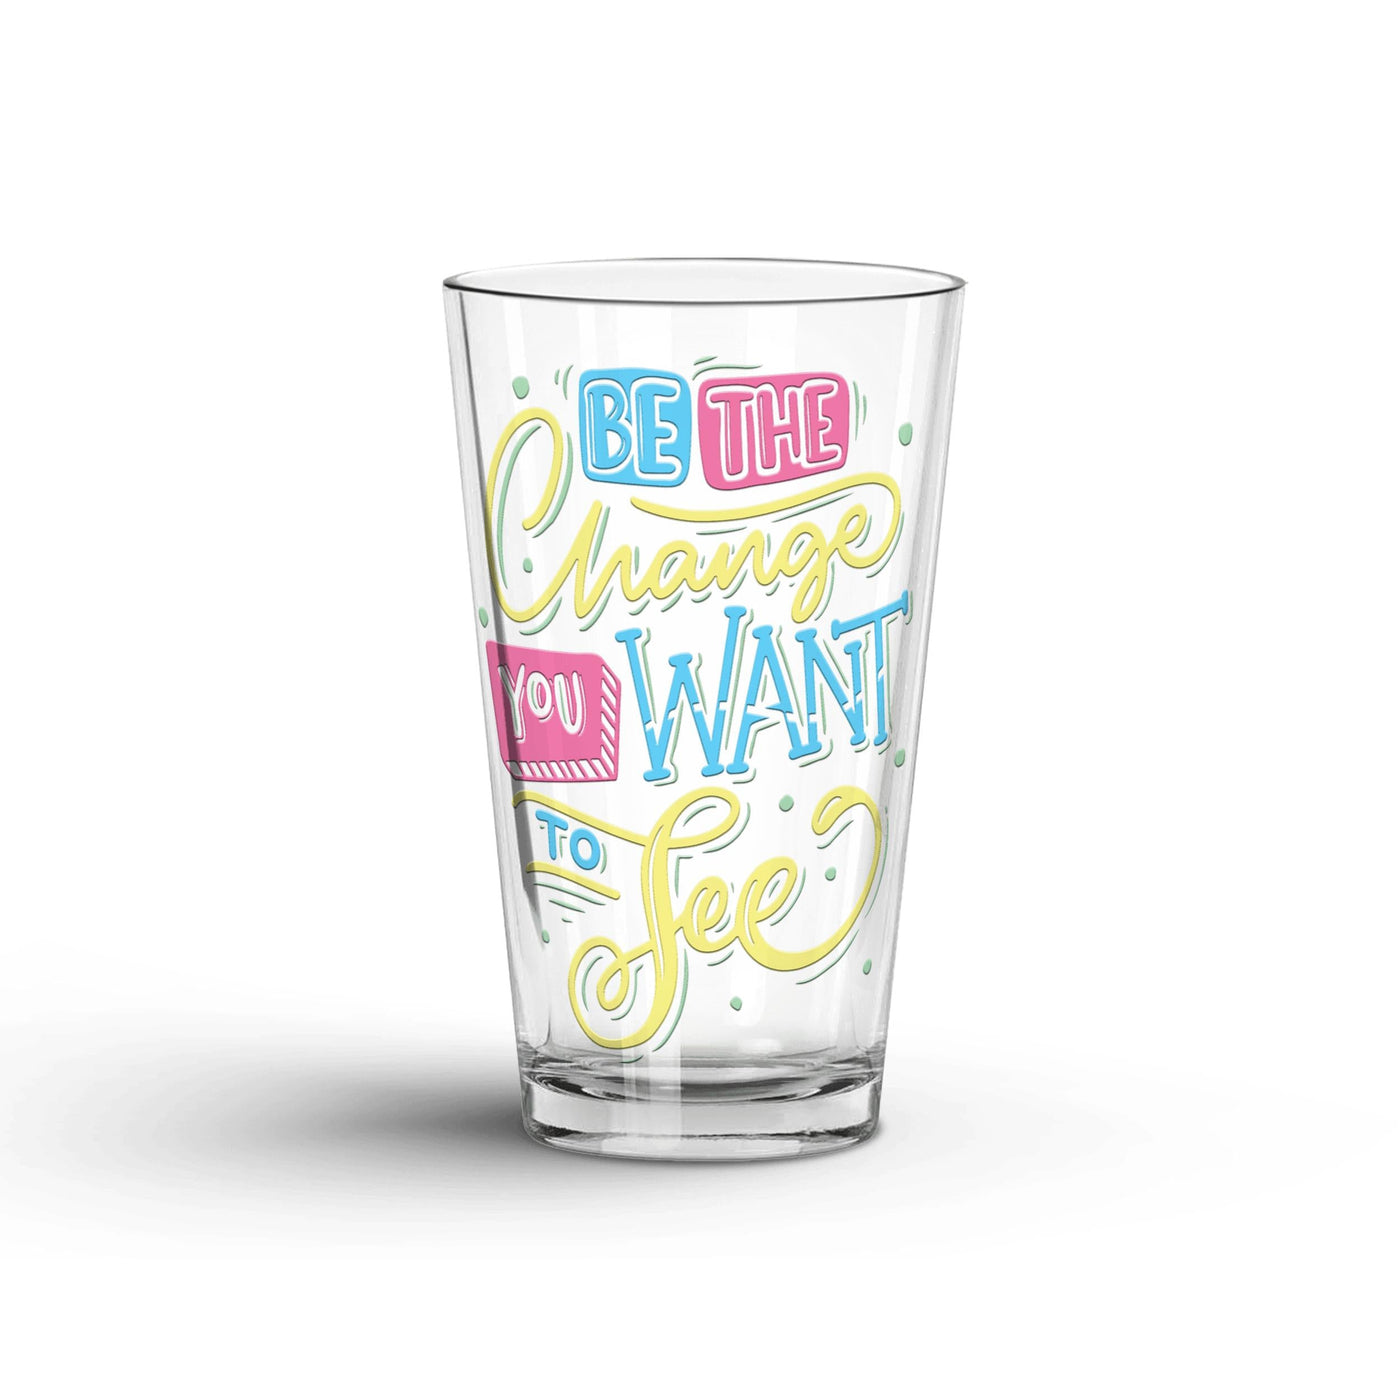 Glass Tumbler: Be The Change You Want To See Glass Tumbler Sam + Zoey  Sam + Zoey